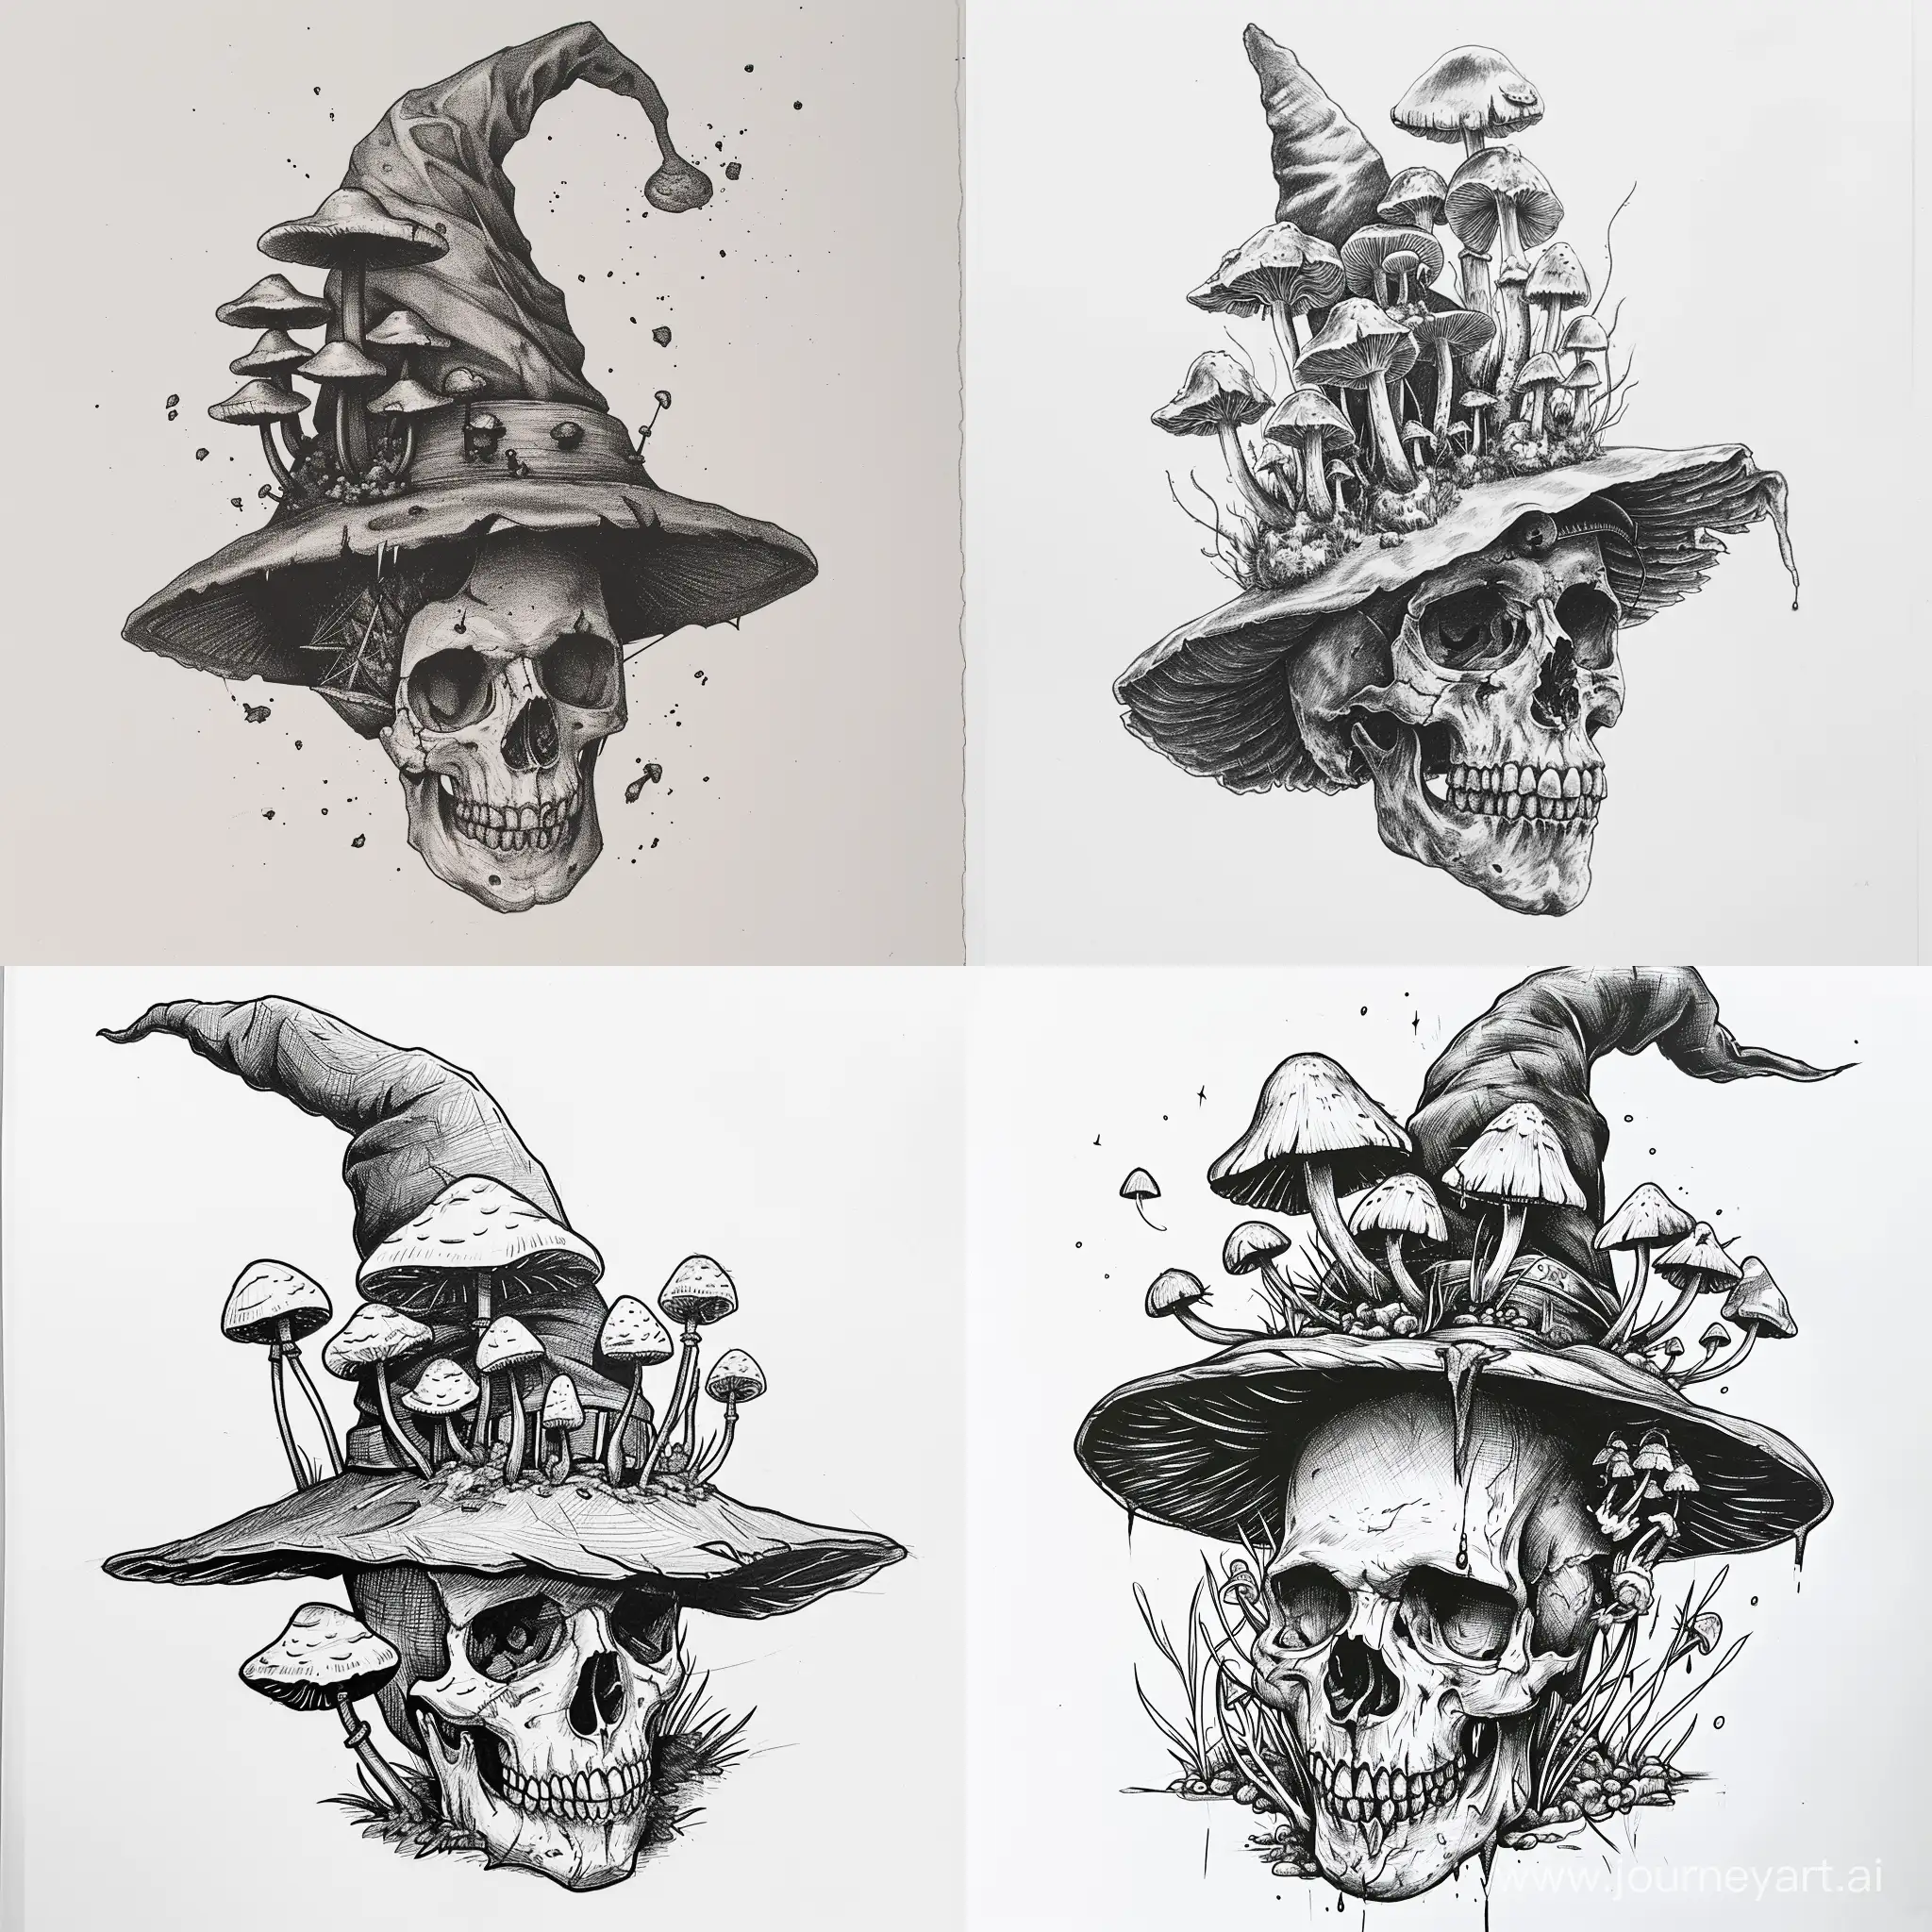 Wizards-Hat-Skull-with-Mushroom-Growth